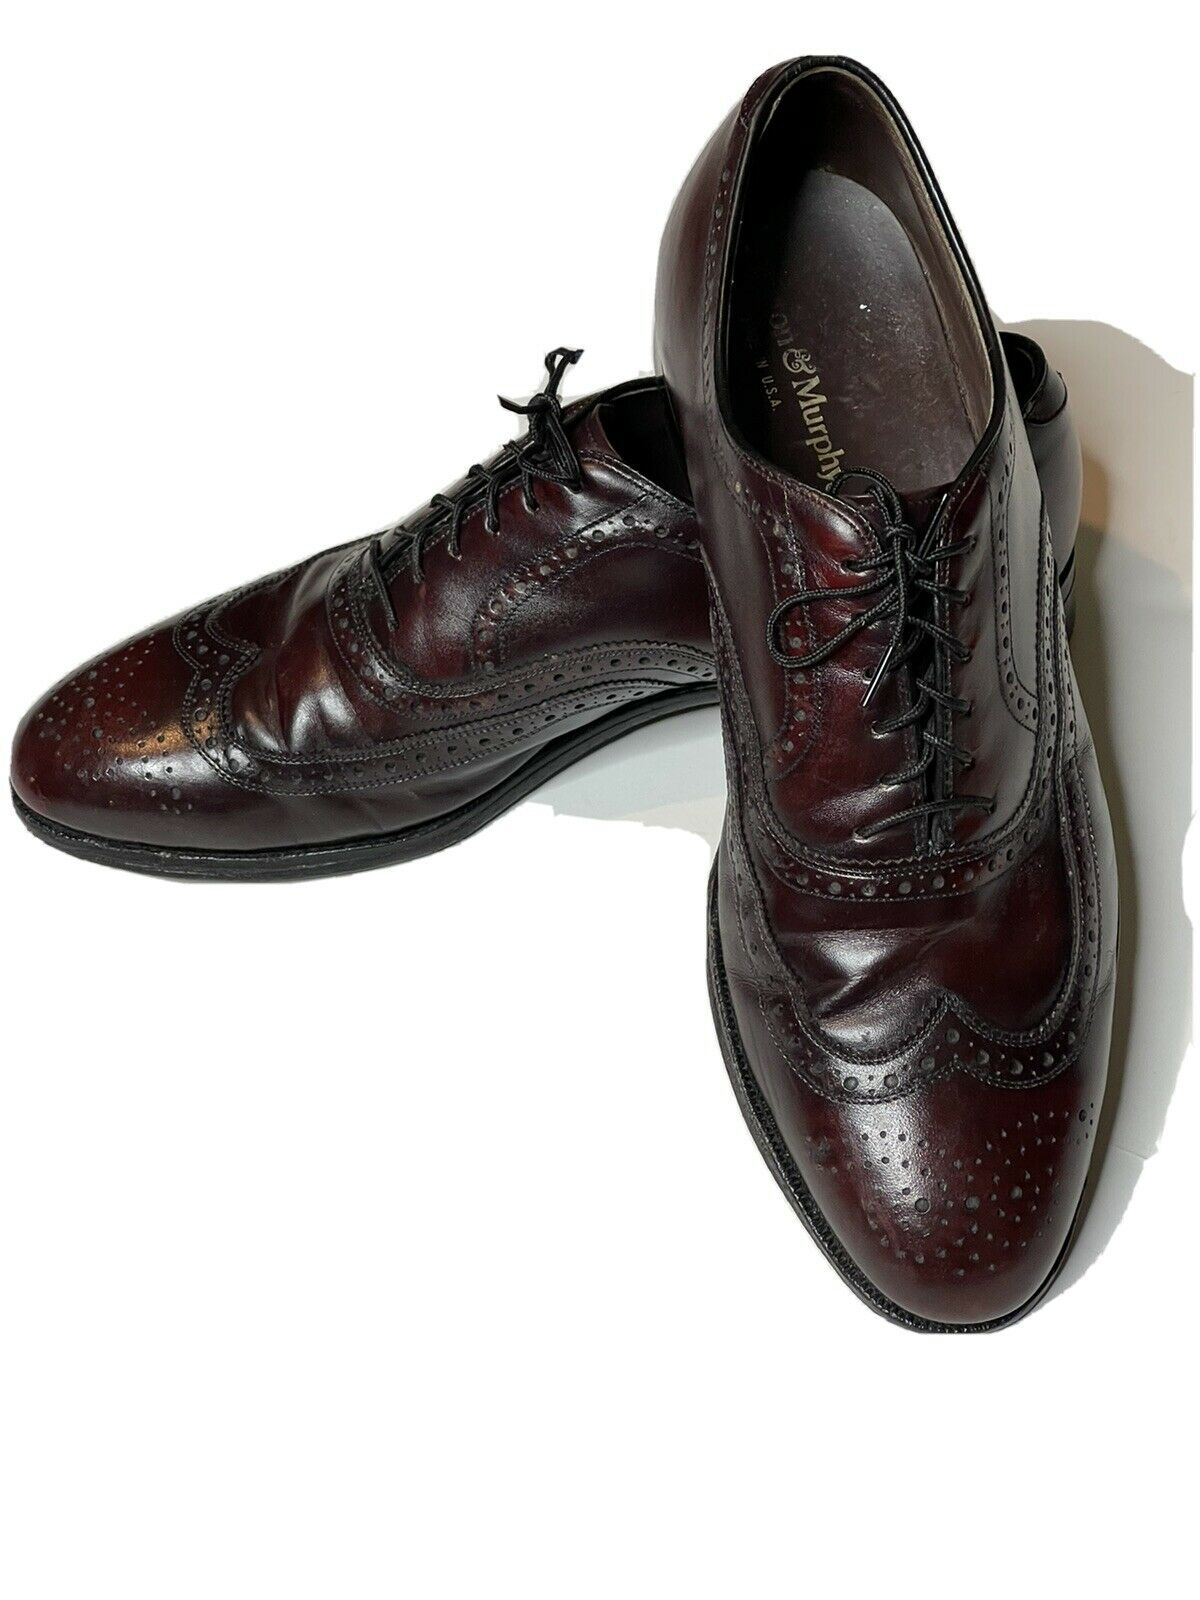 men’s Johnson and Murphy wing Tip maroon leather dress/casual shoe 10 1/2